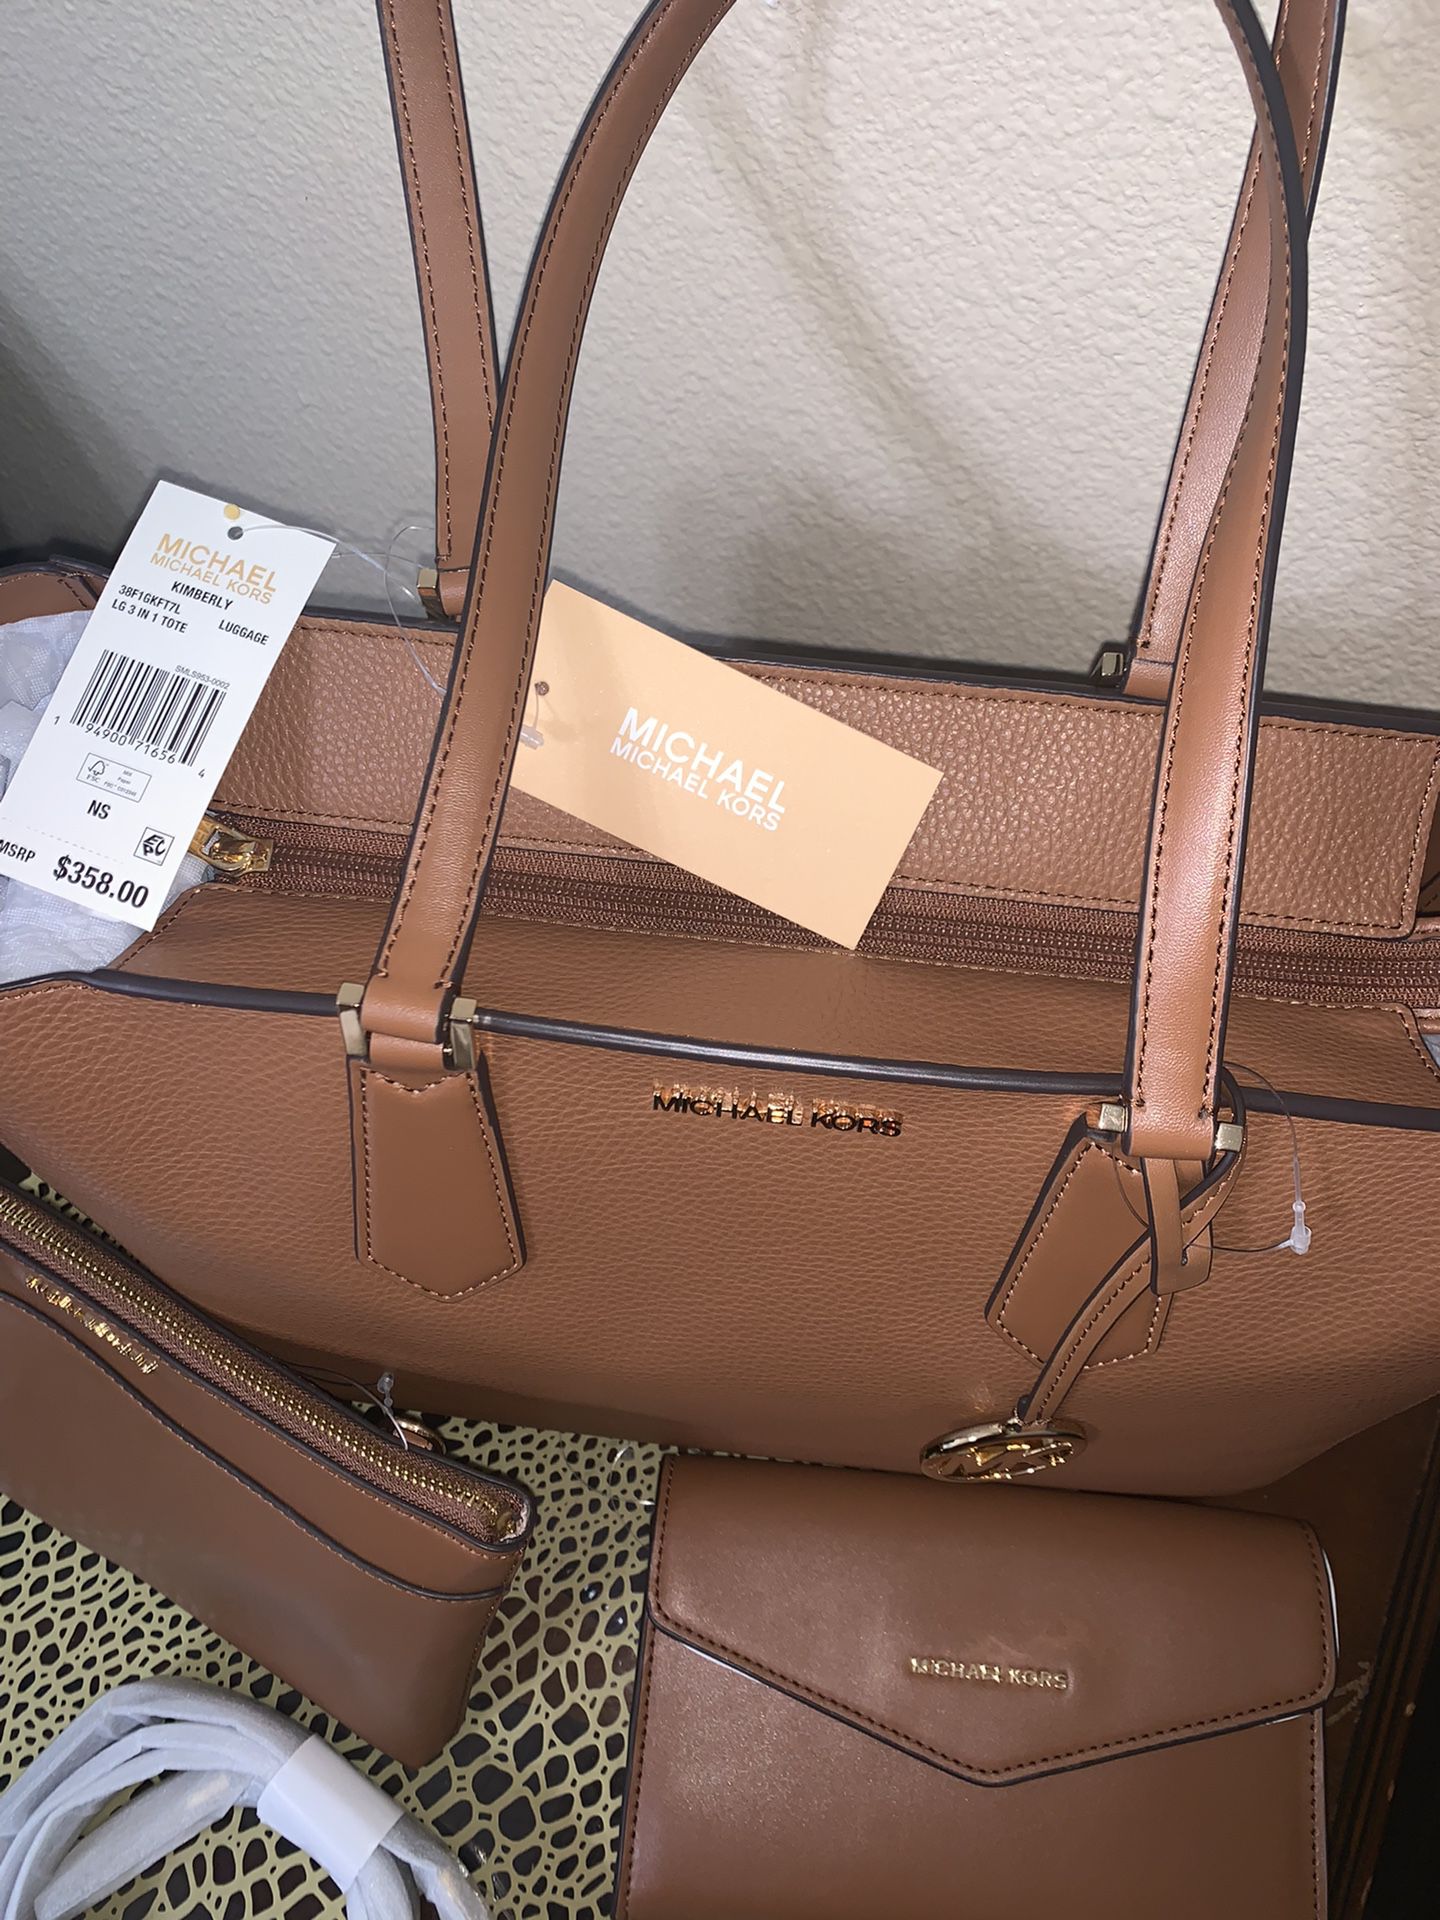 Michael Kors 3 In 1 Kimberly Tote for Sale in Denton, TX - OfferUp